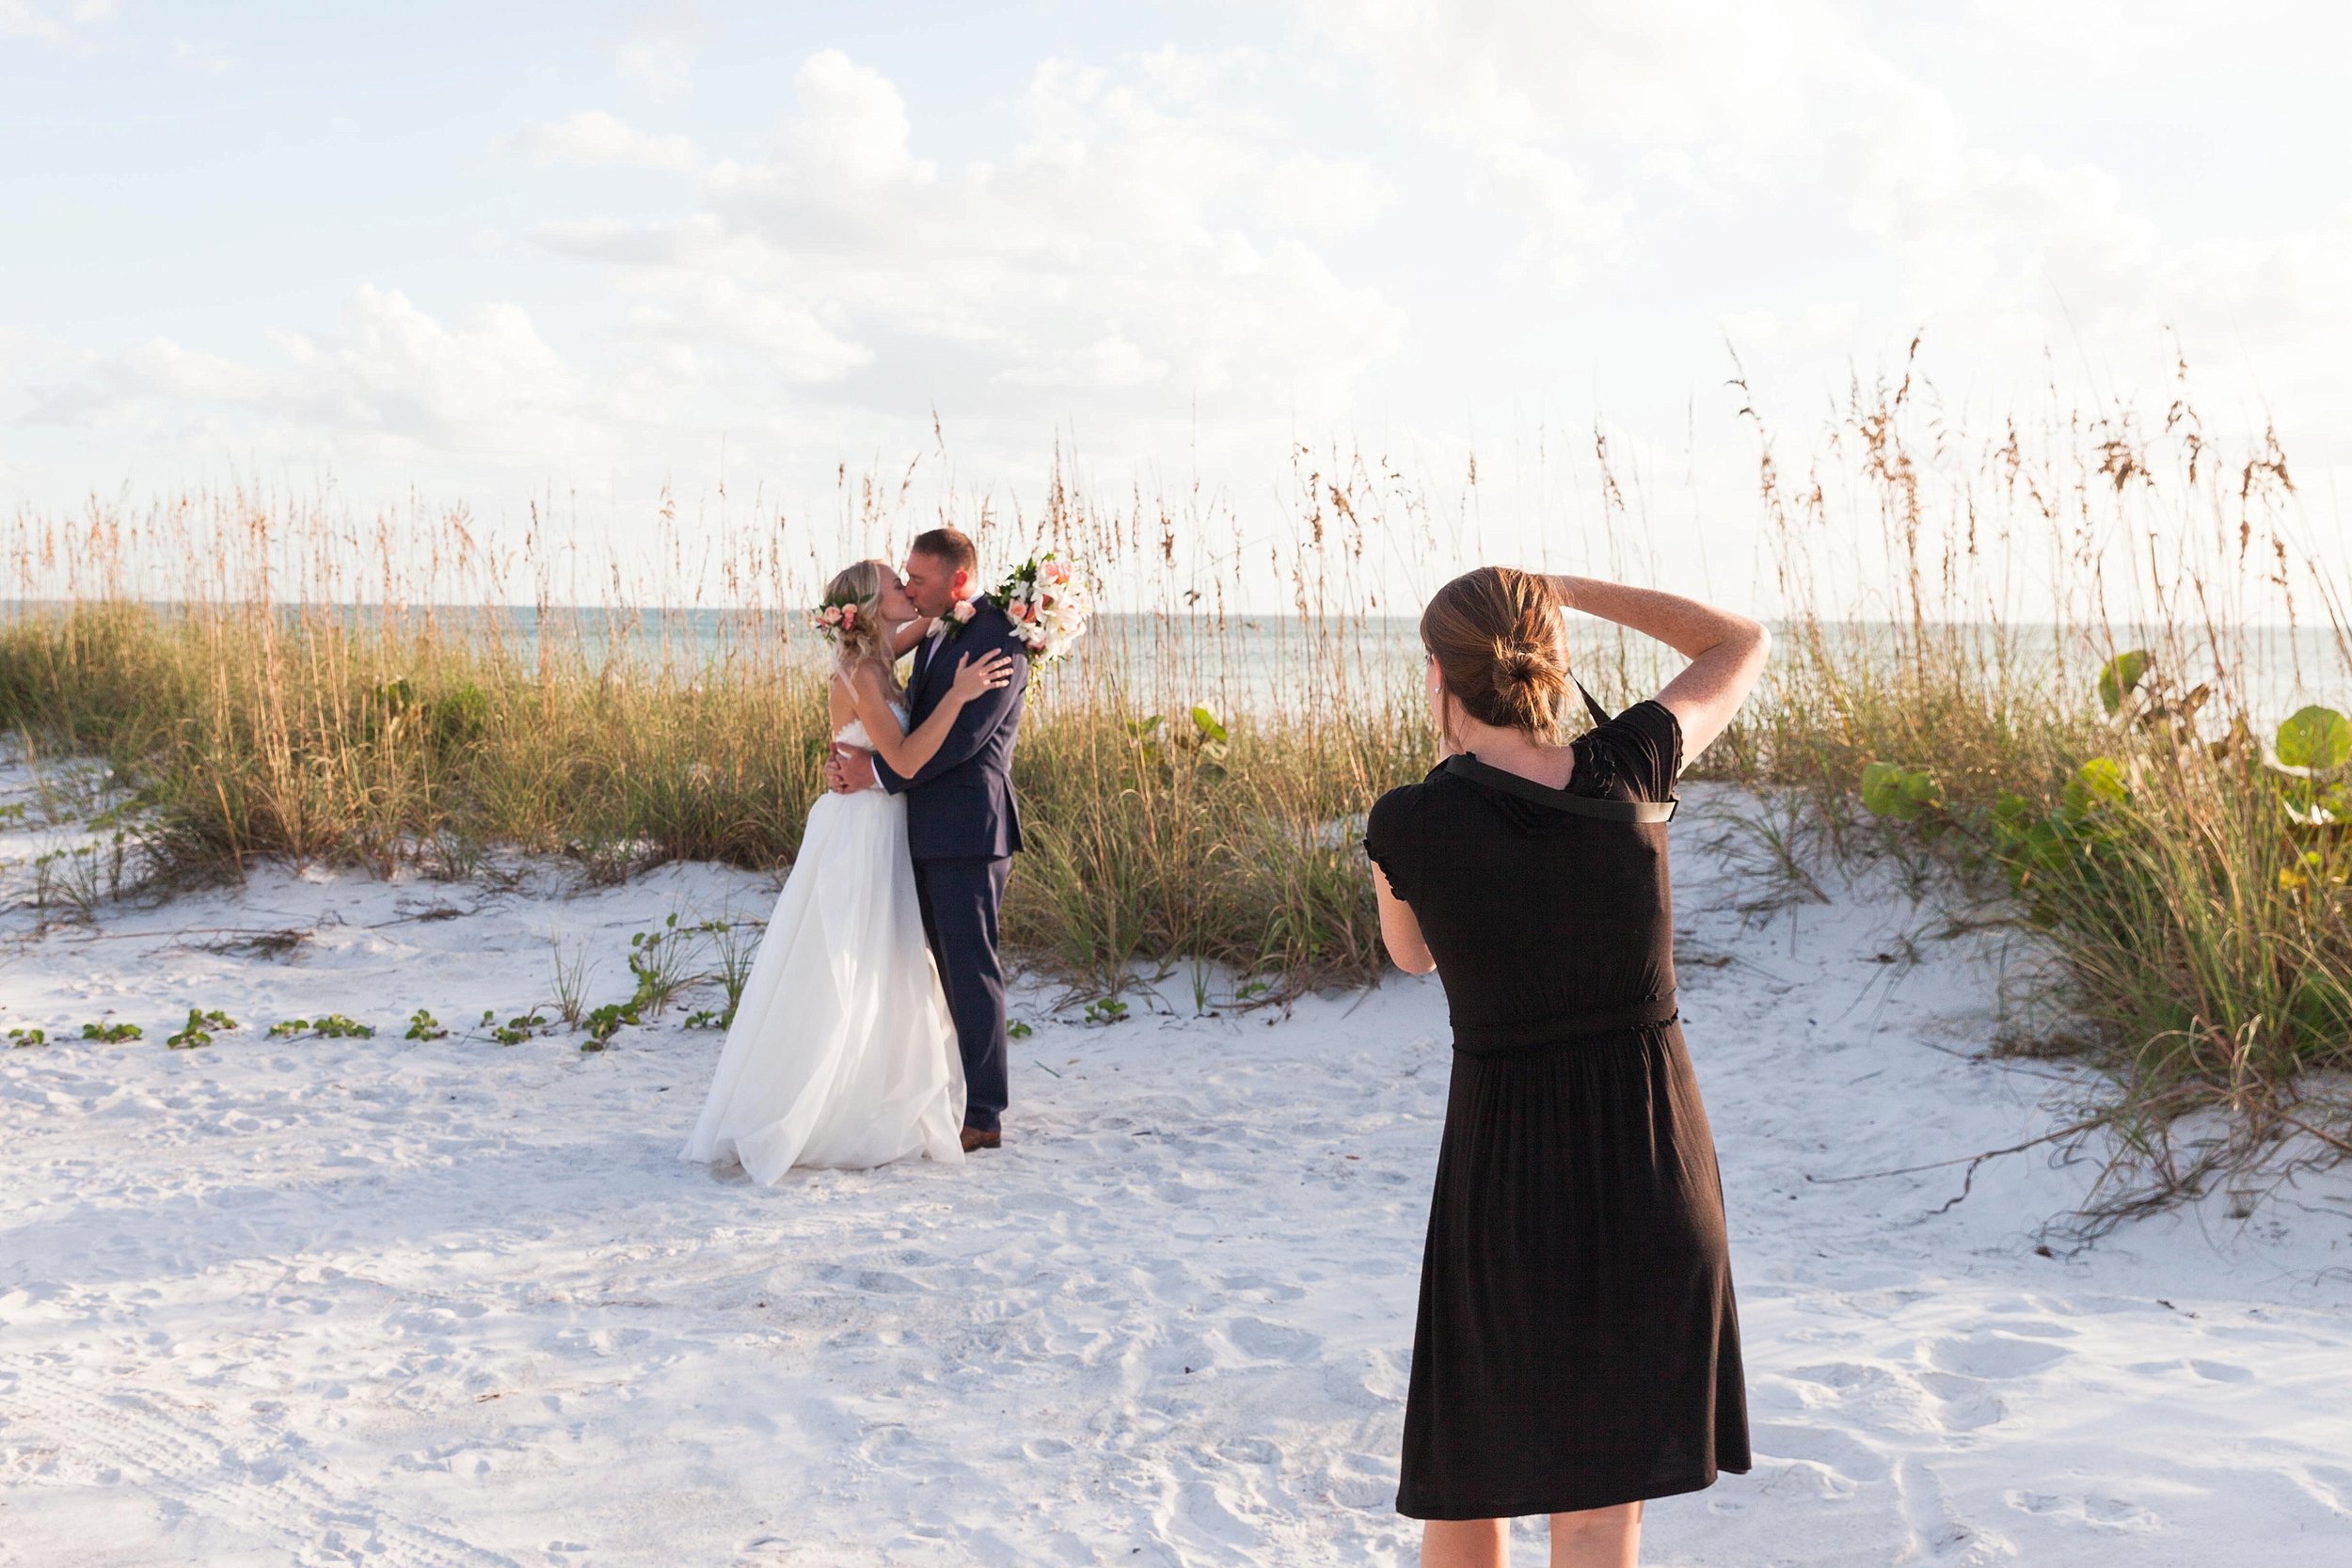 Amy and Steven's wedding at Anna Maria was incredible. They are the sweetest!!